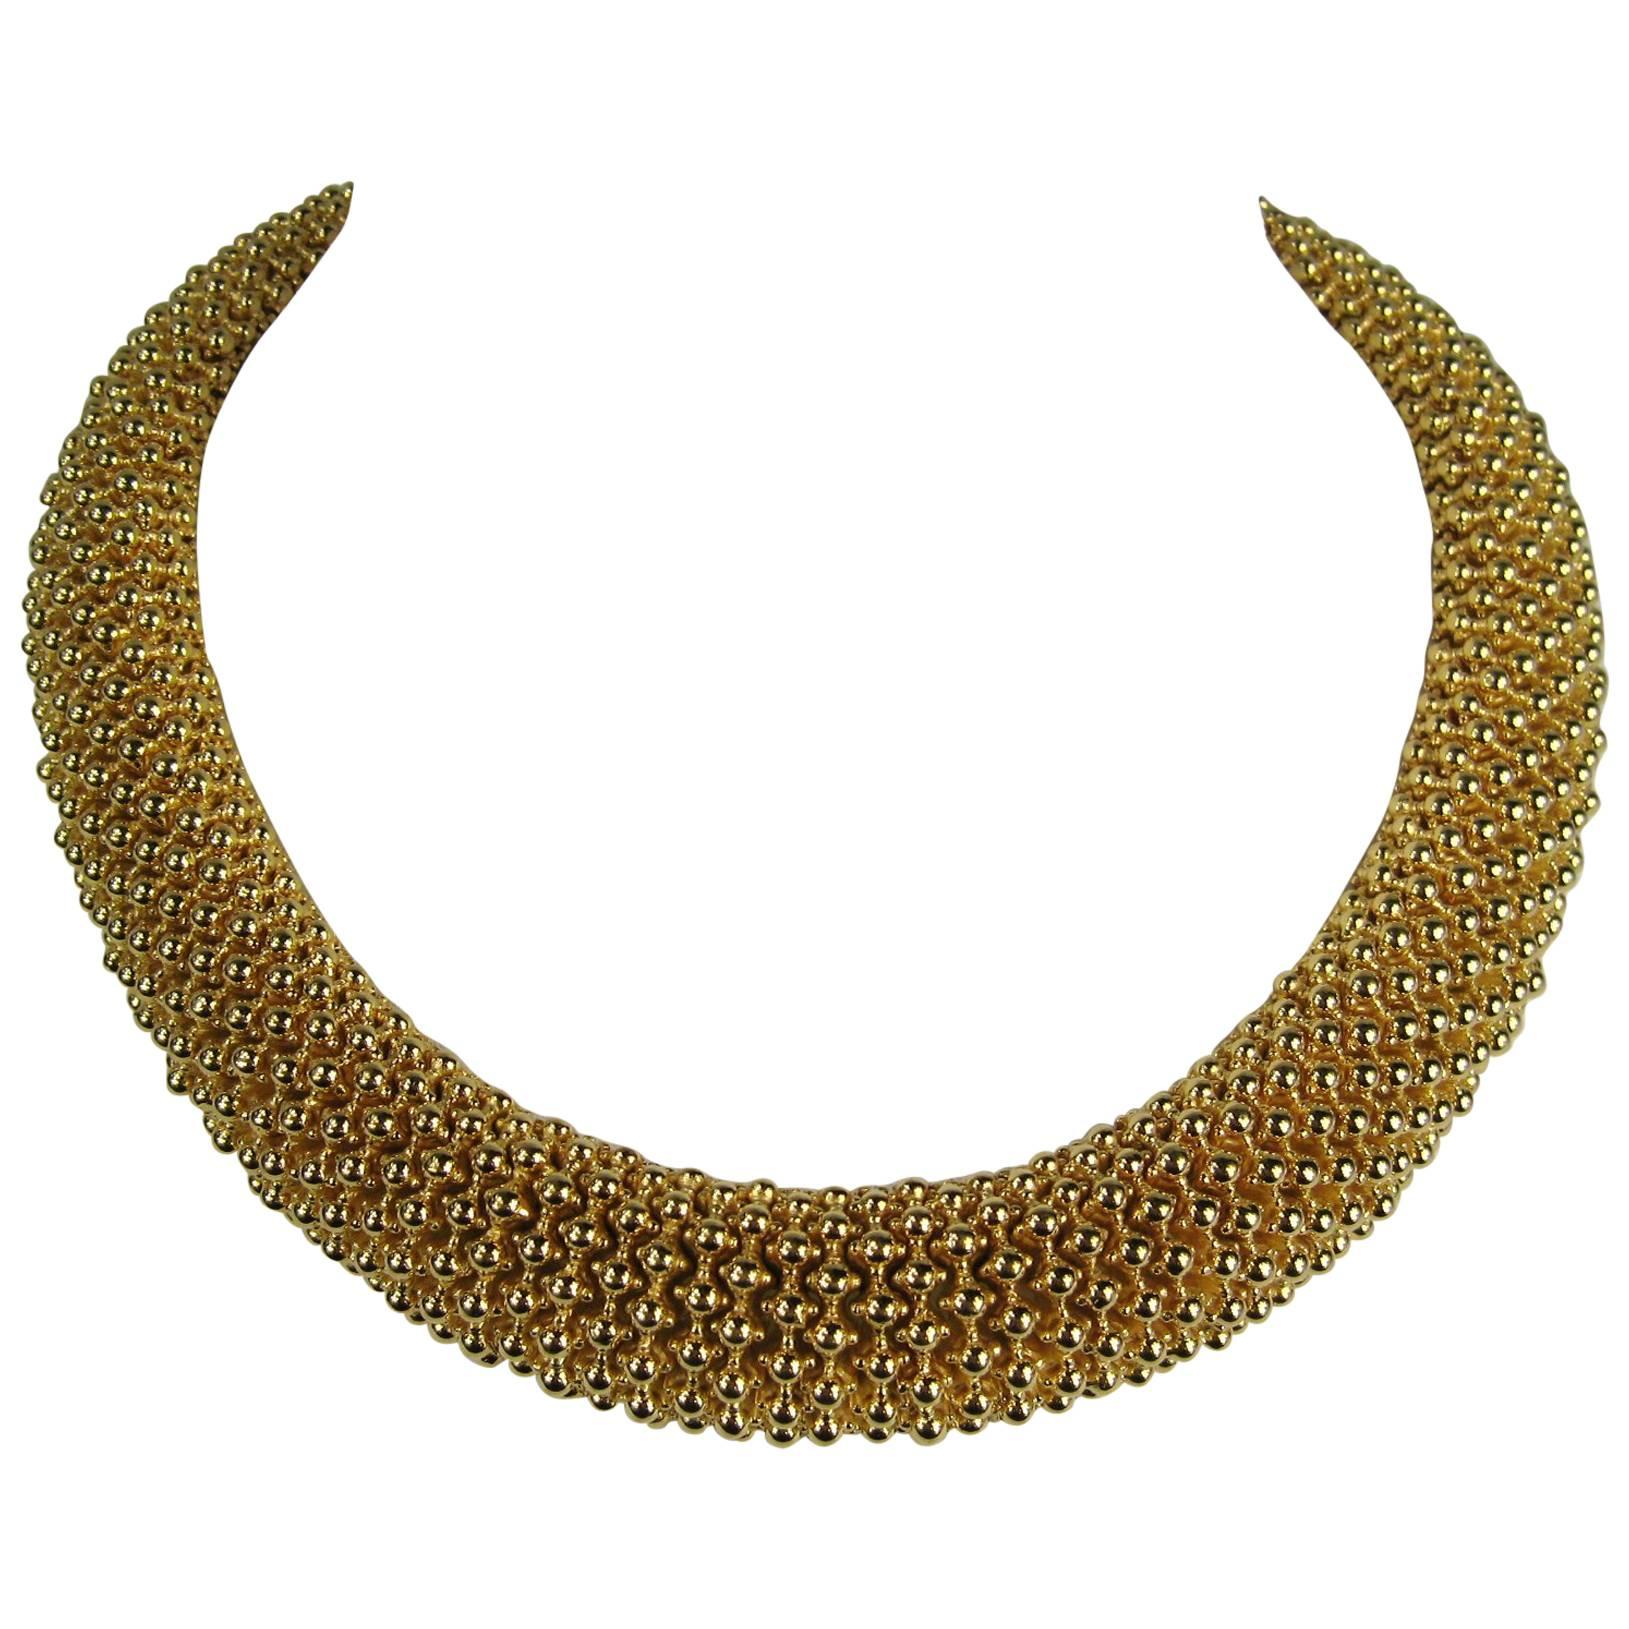 Ciner Gold Tone  Choker Necklace New Old Stock 1980s 